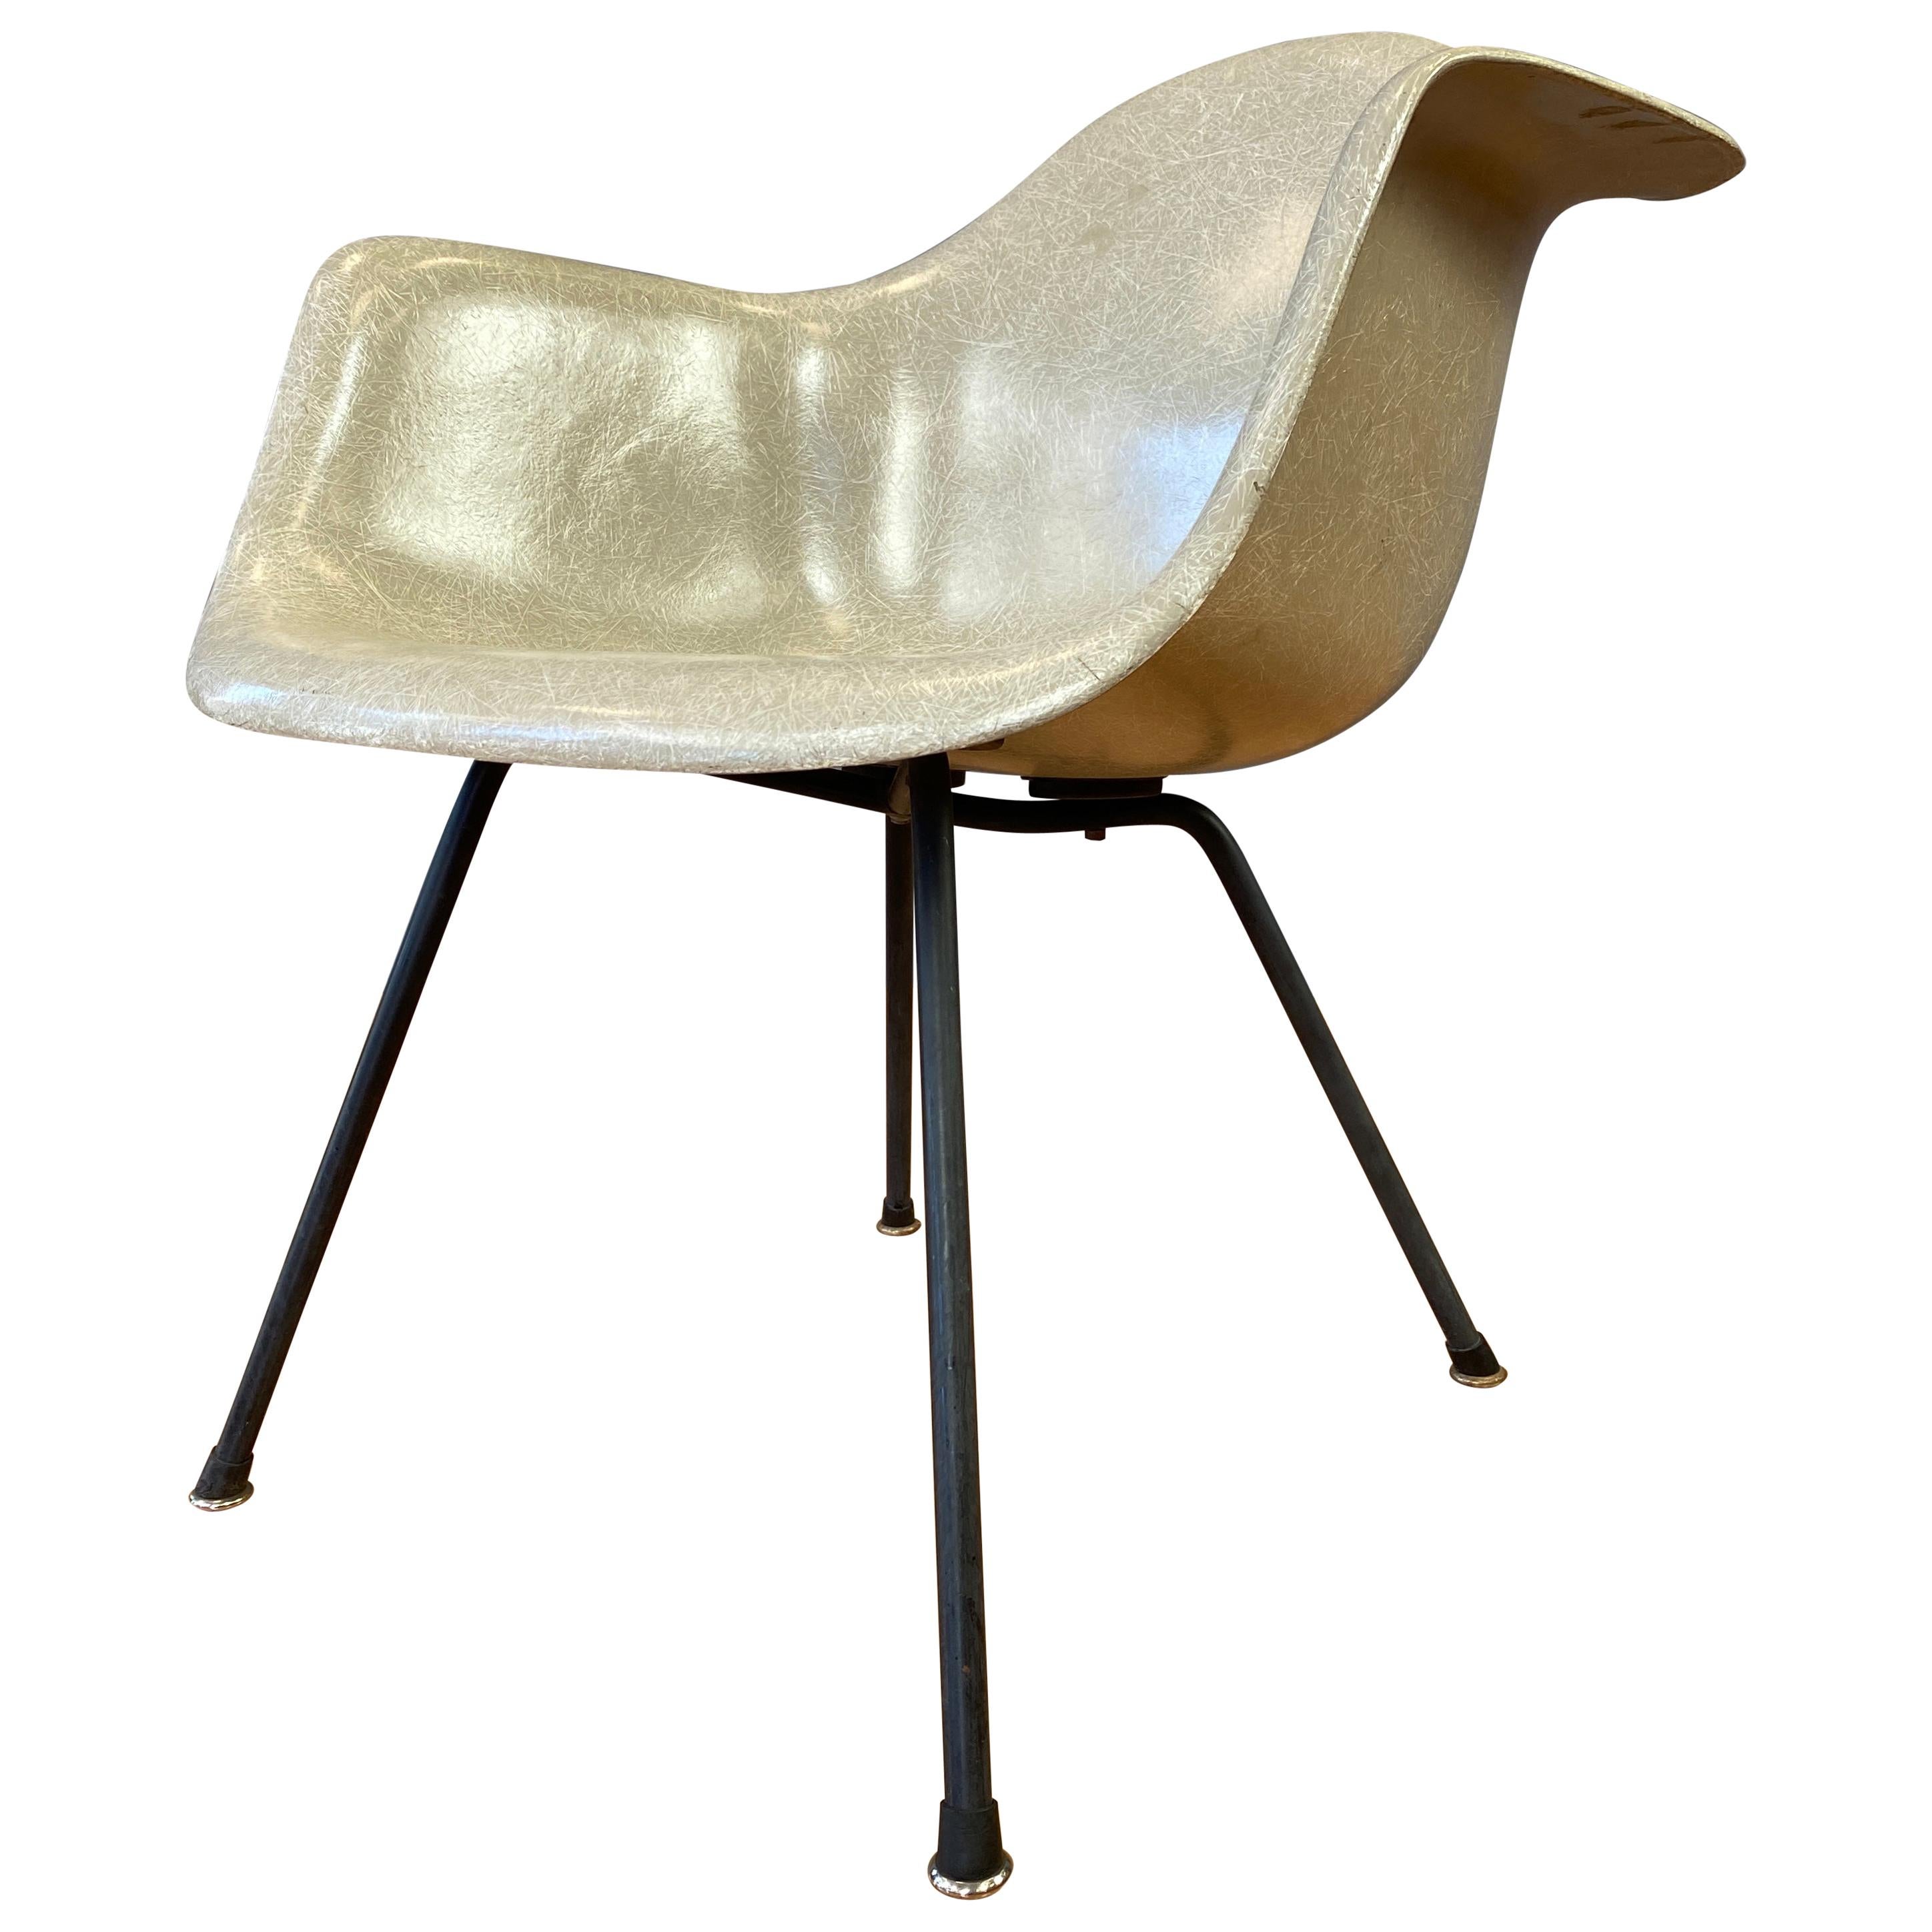 Early Production Charles Eames Fiberglass Shell Armchair for Herman Miller